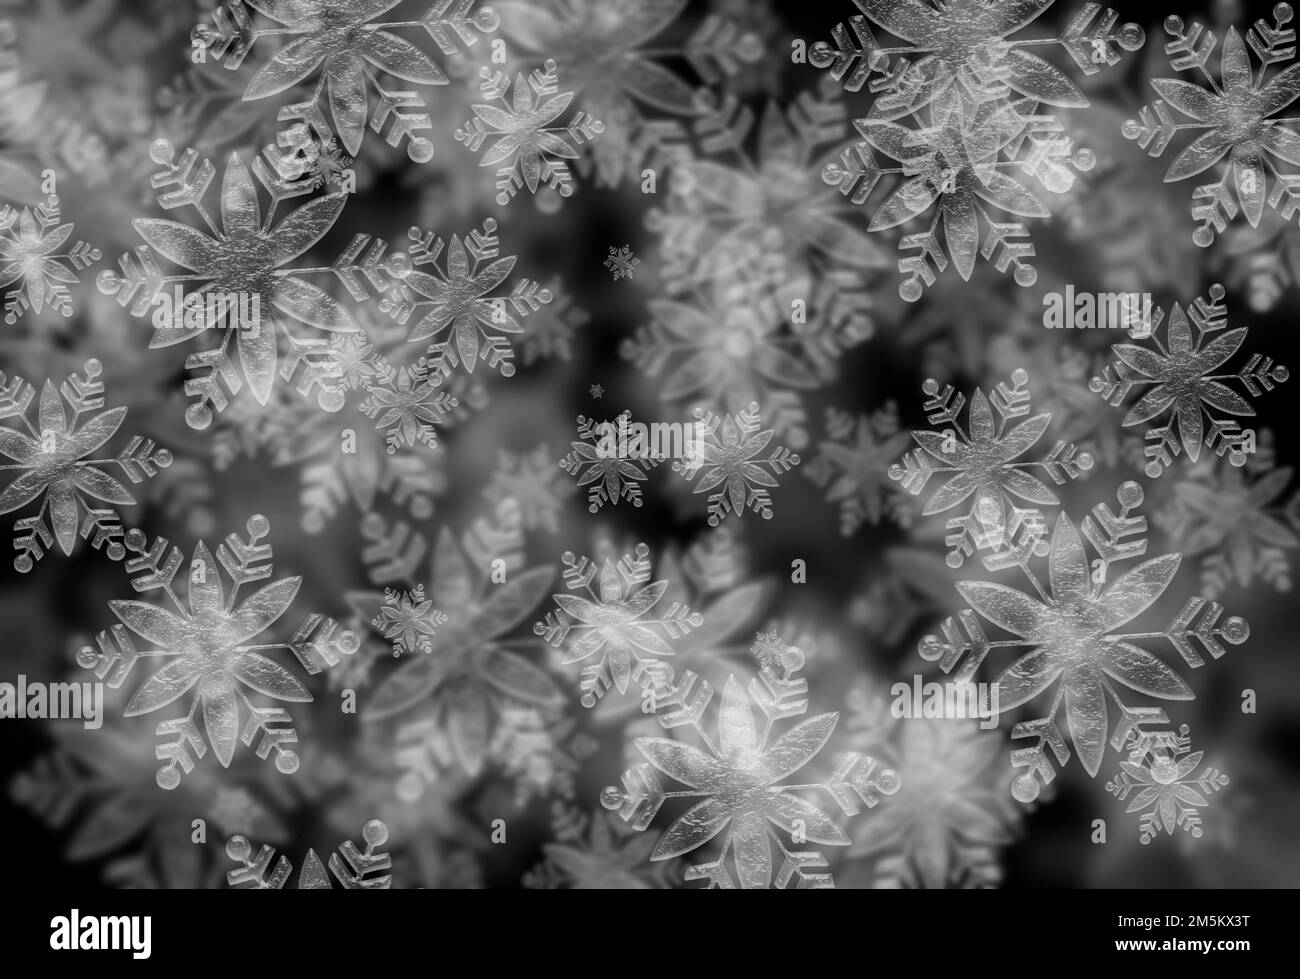 Digitally created image of Abstract  snowflakes abstract background Stock Photo